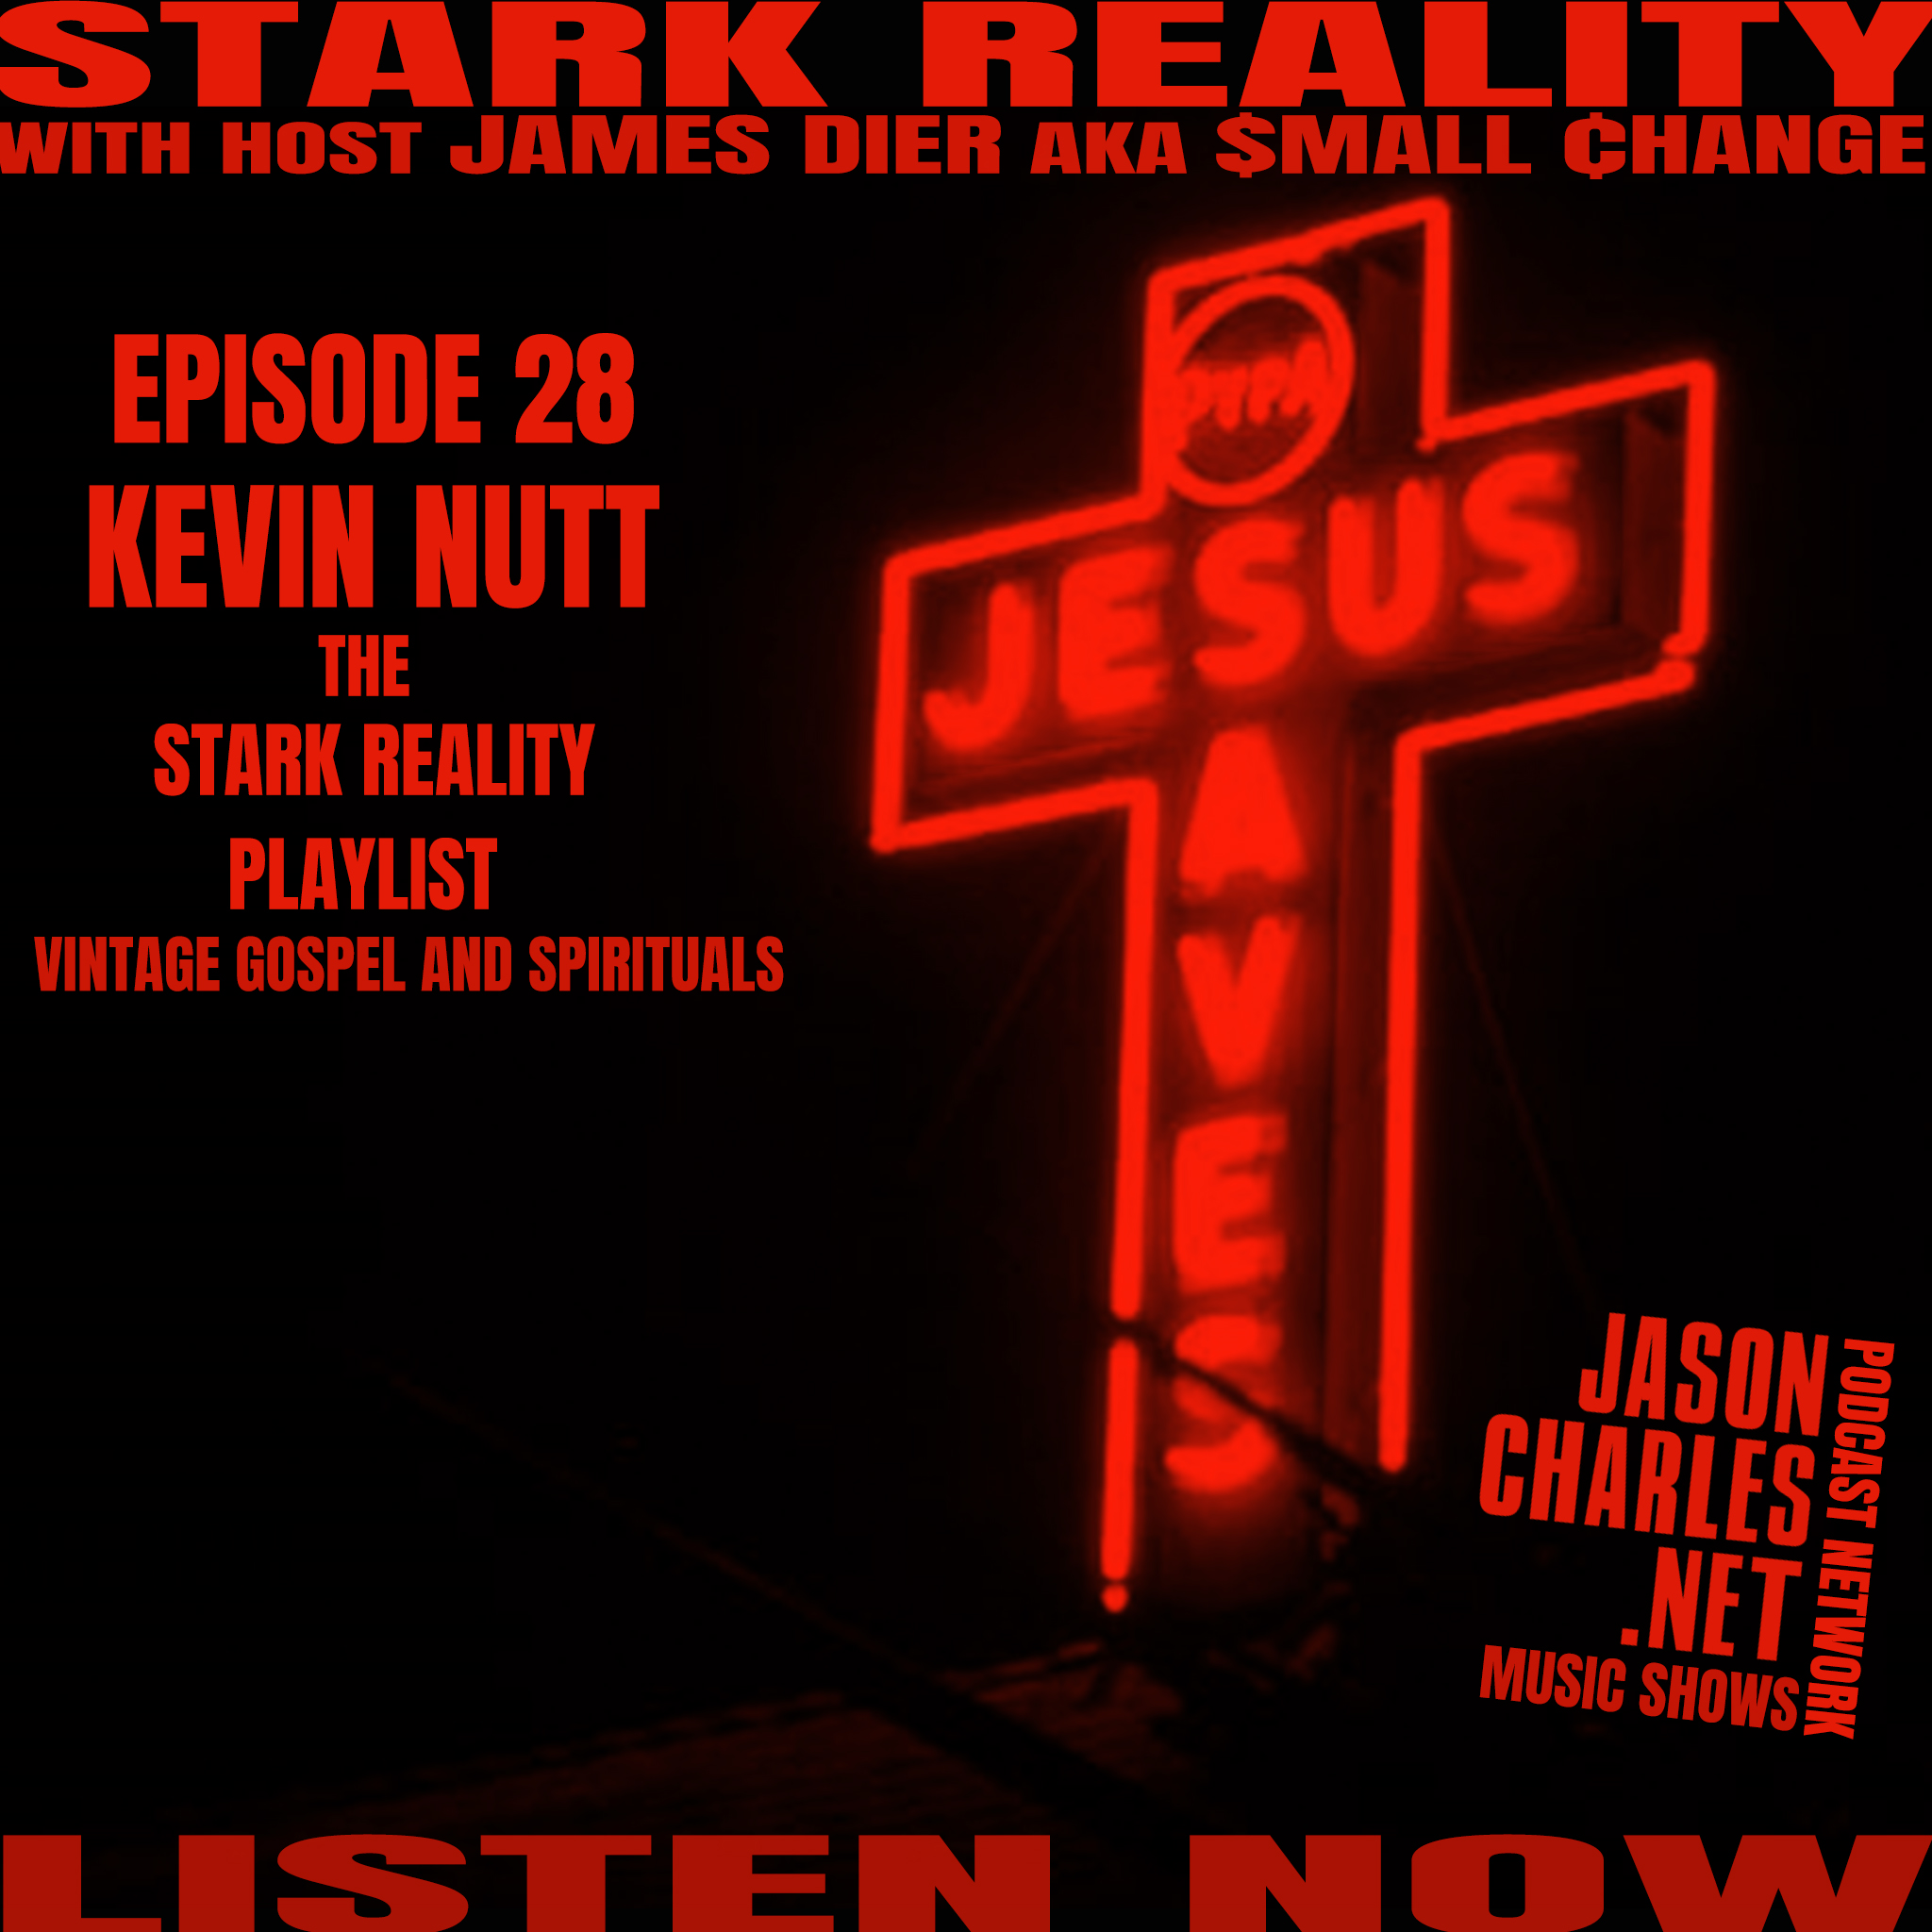 STARK REALITY PLAYLISTS 28 Guest Kevin Nutt's Exclusive Vintage Gospel and Spirituals Mix